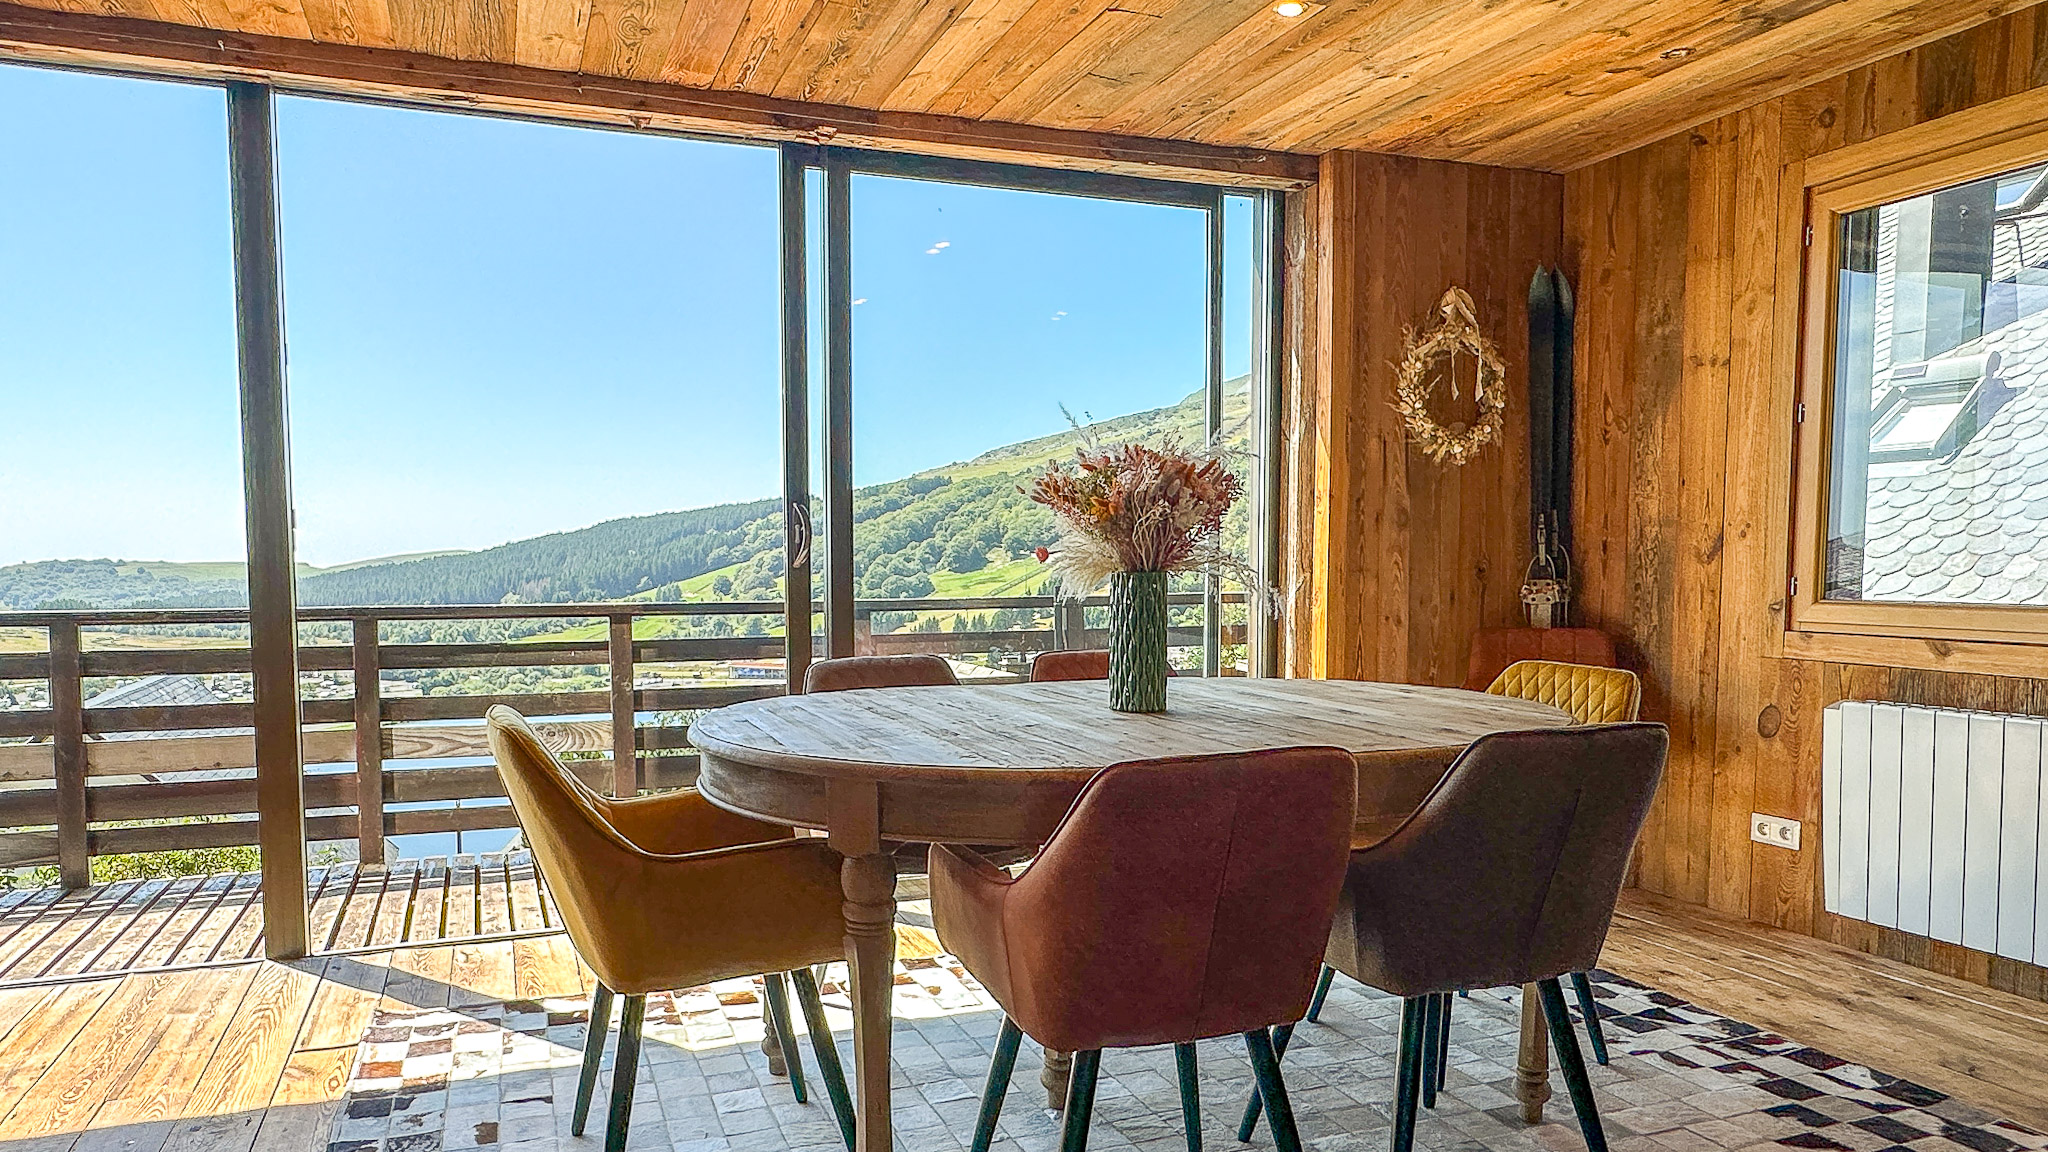 Chalet l'anorak Super Besse: a perfect getaway with a new stay